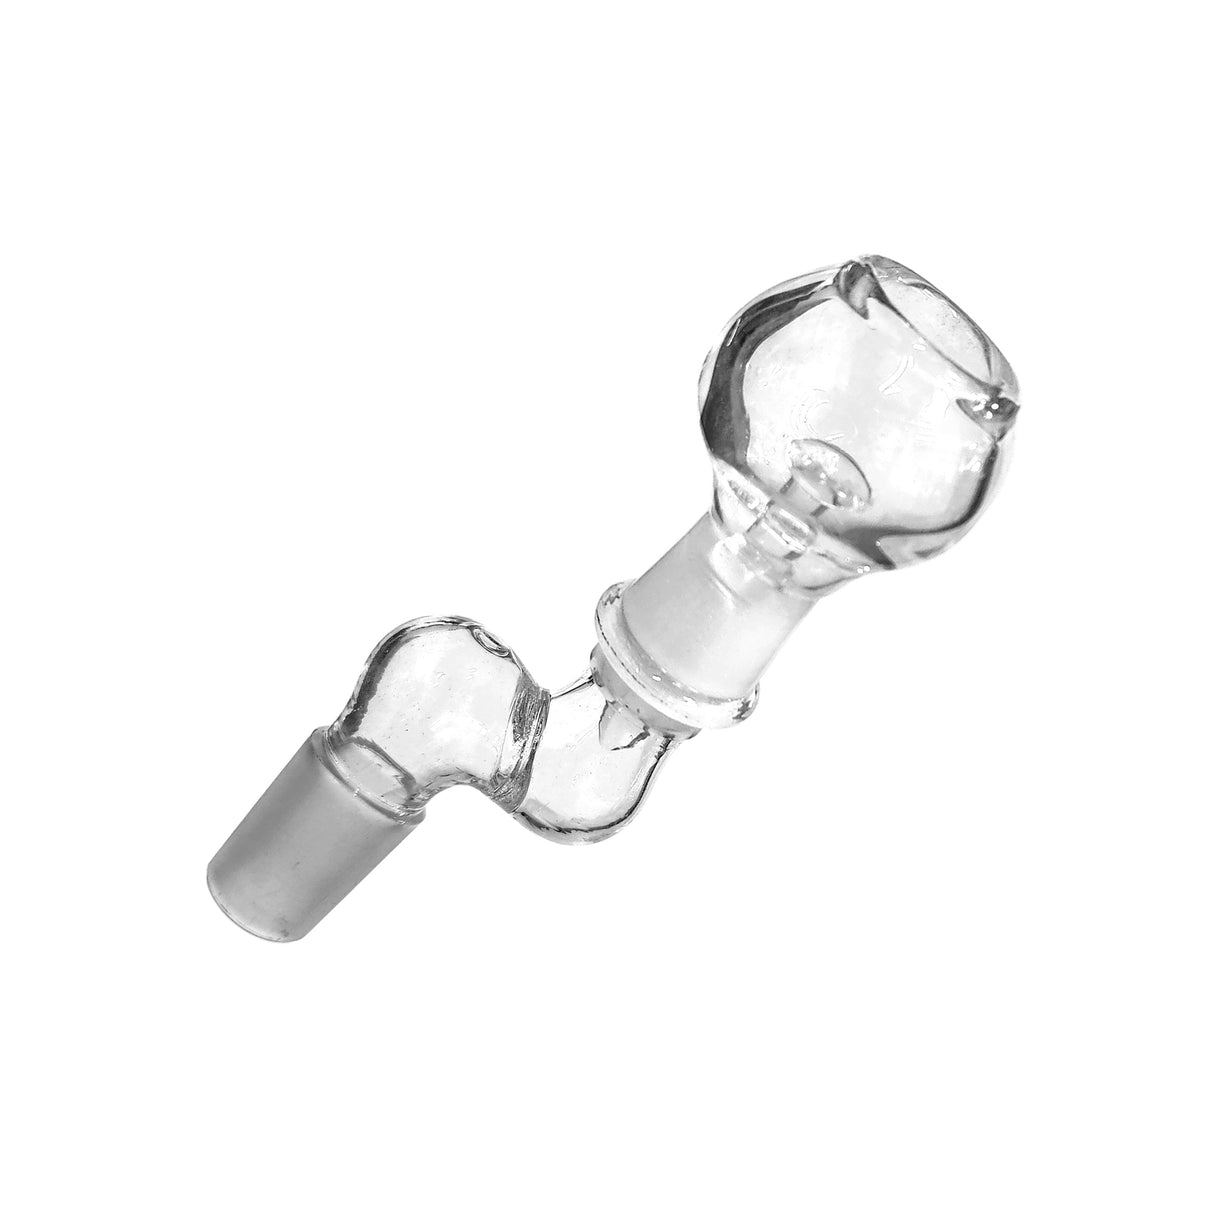 19mm Glass Nail Dome Adapter Set